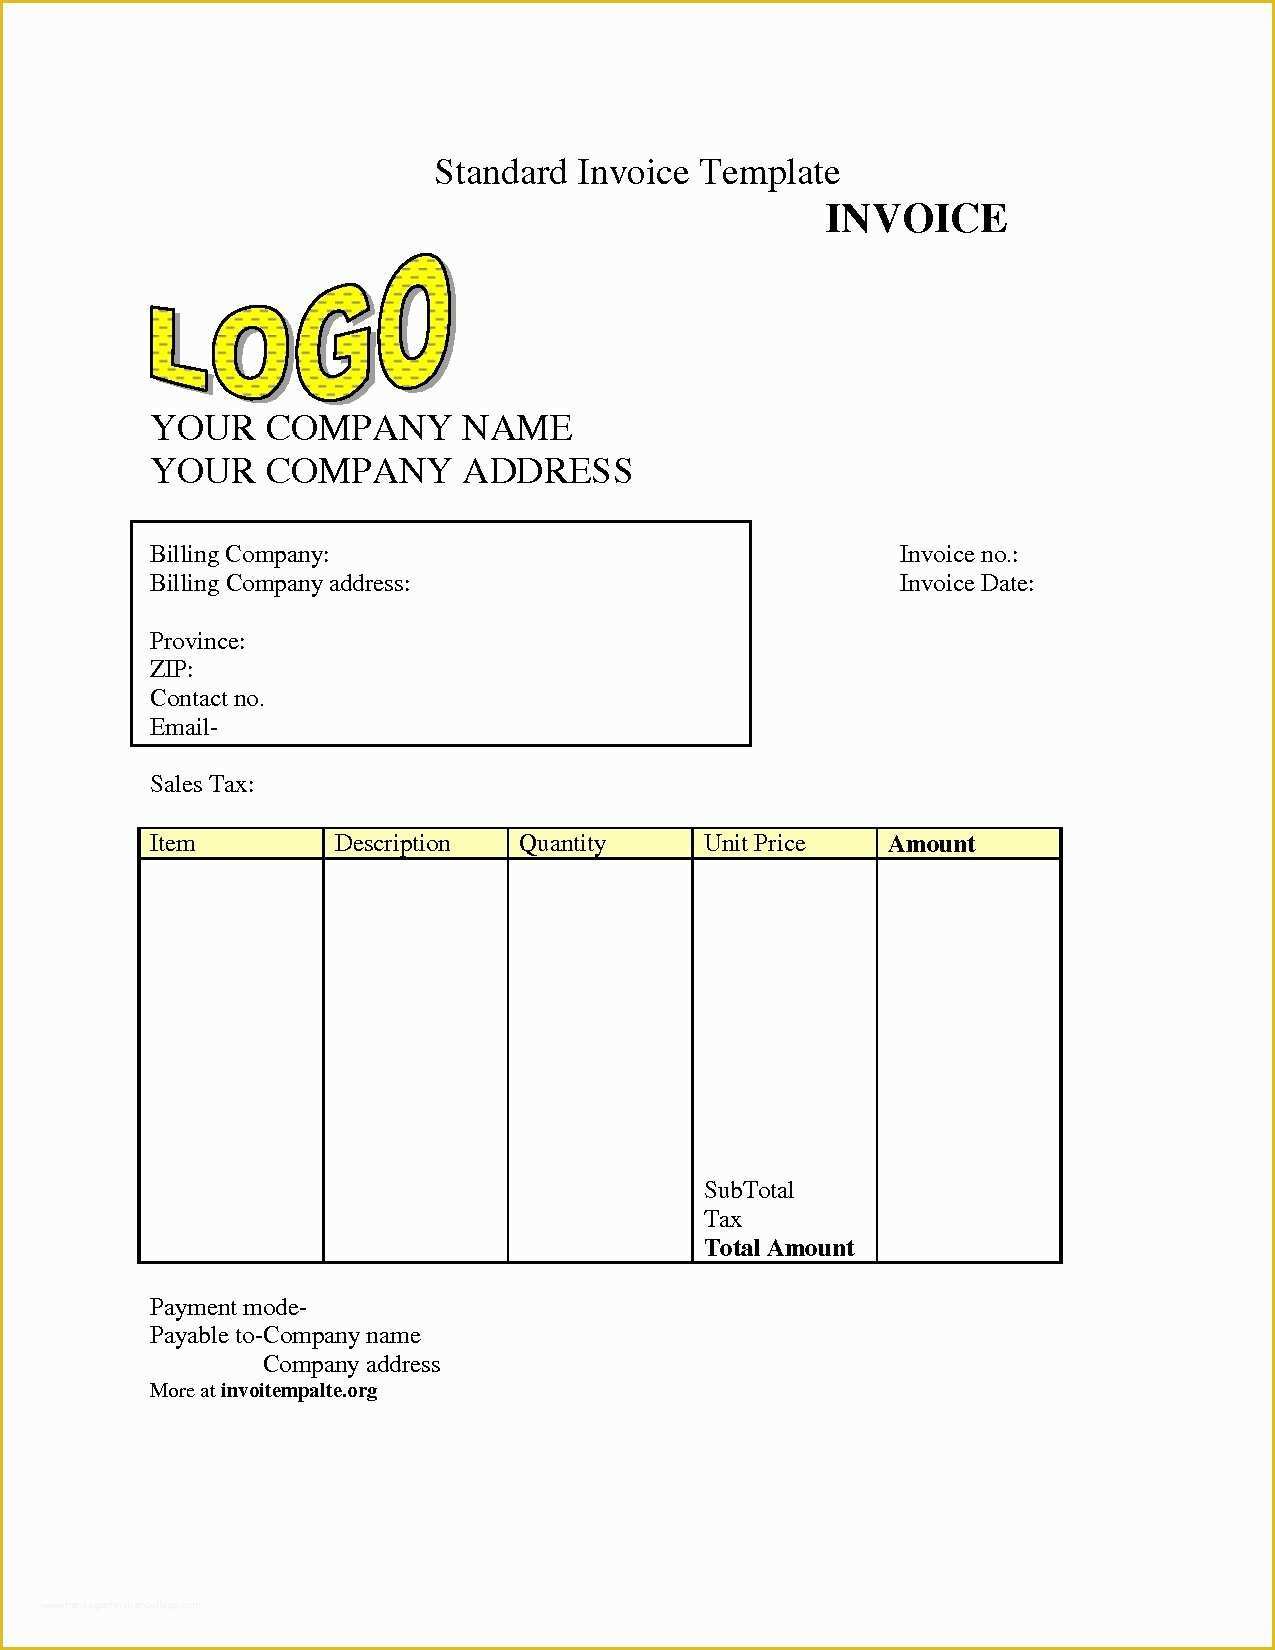 Free Online Invoice Template Of Free Invoice Templet Invoice Template Ideas